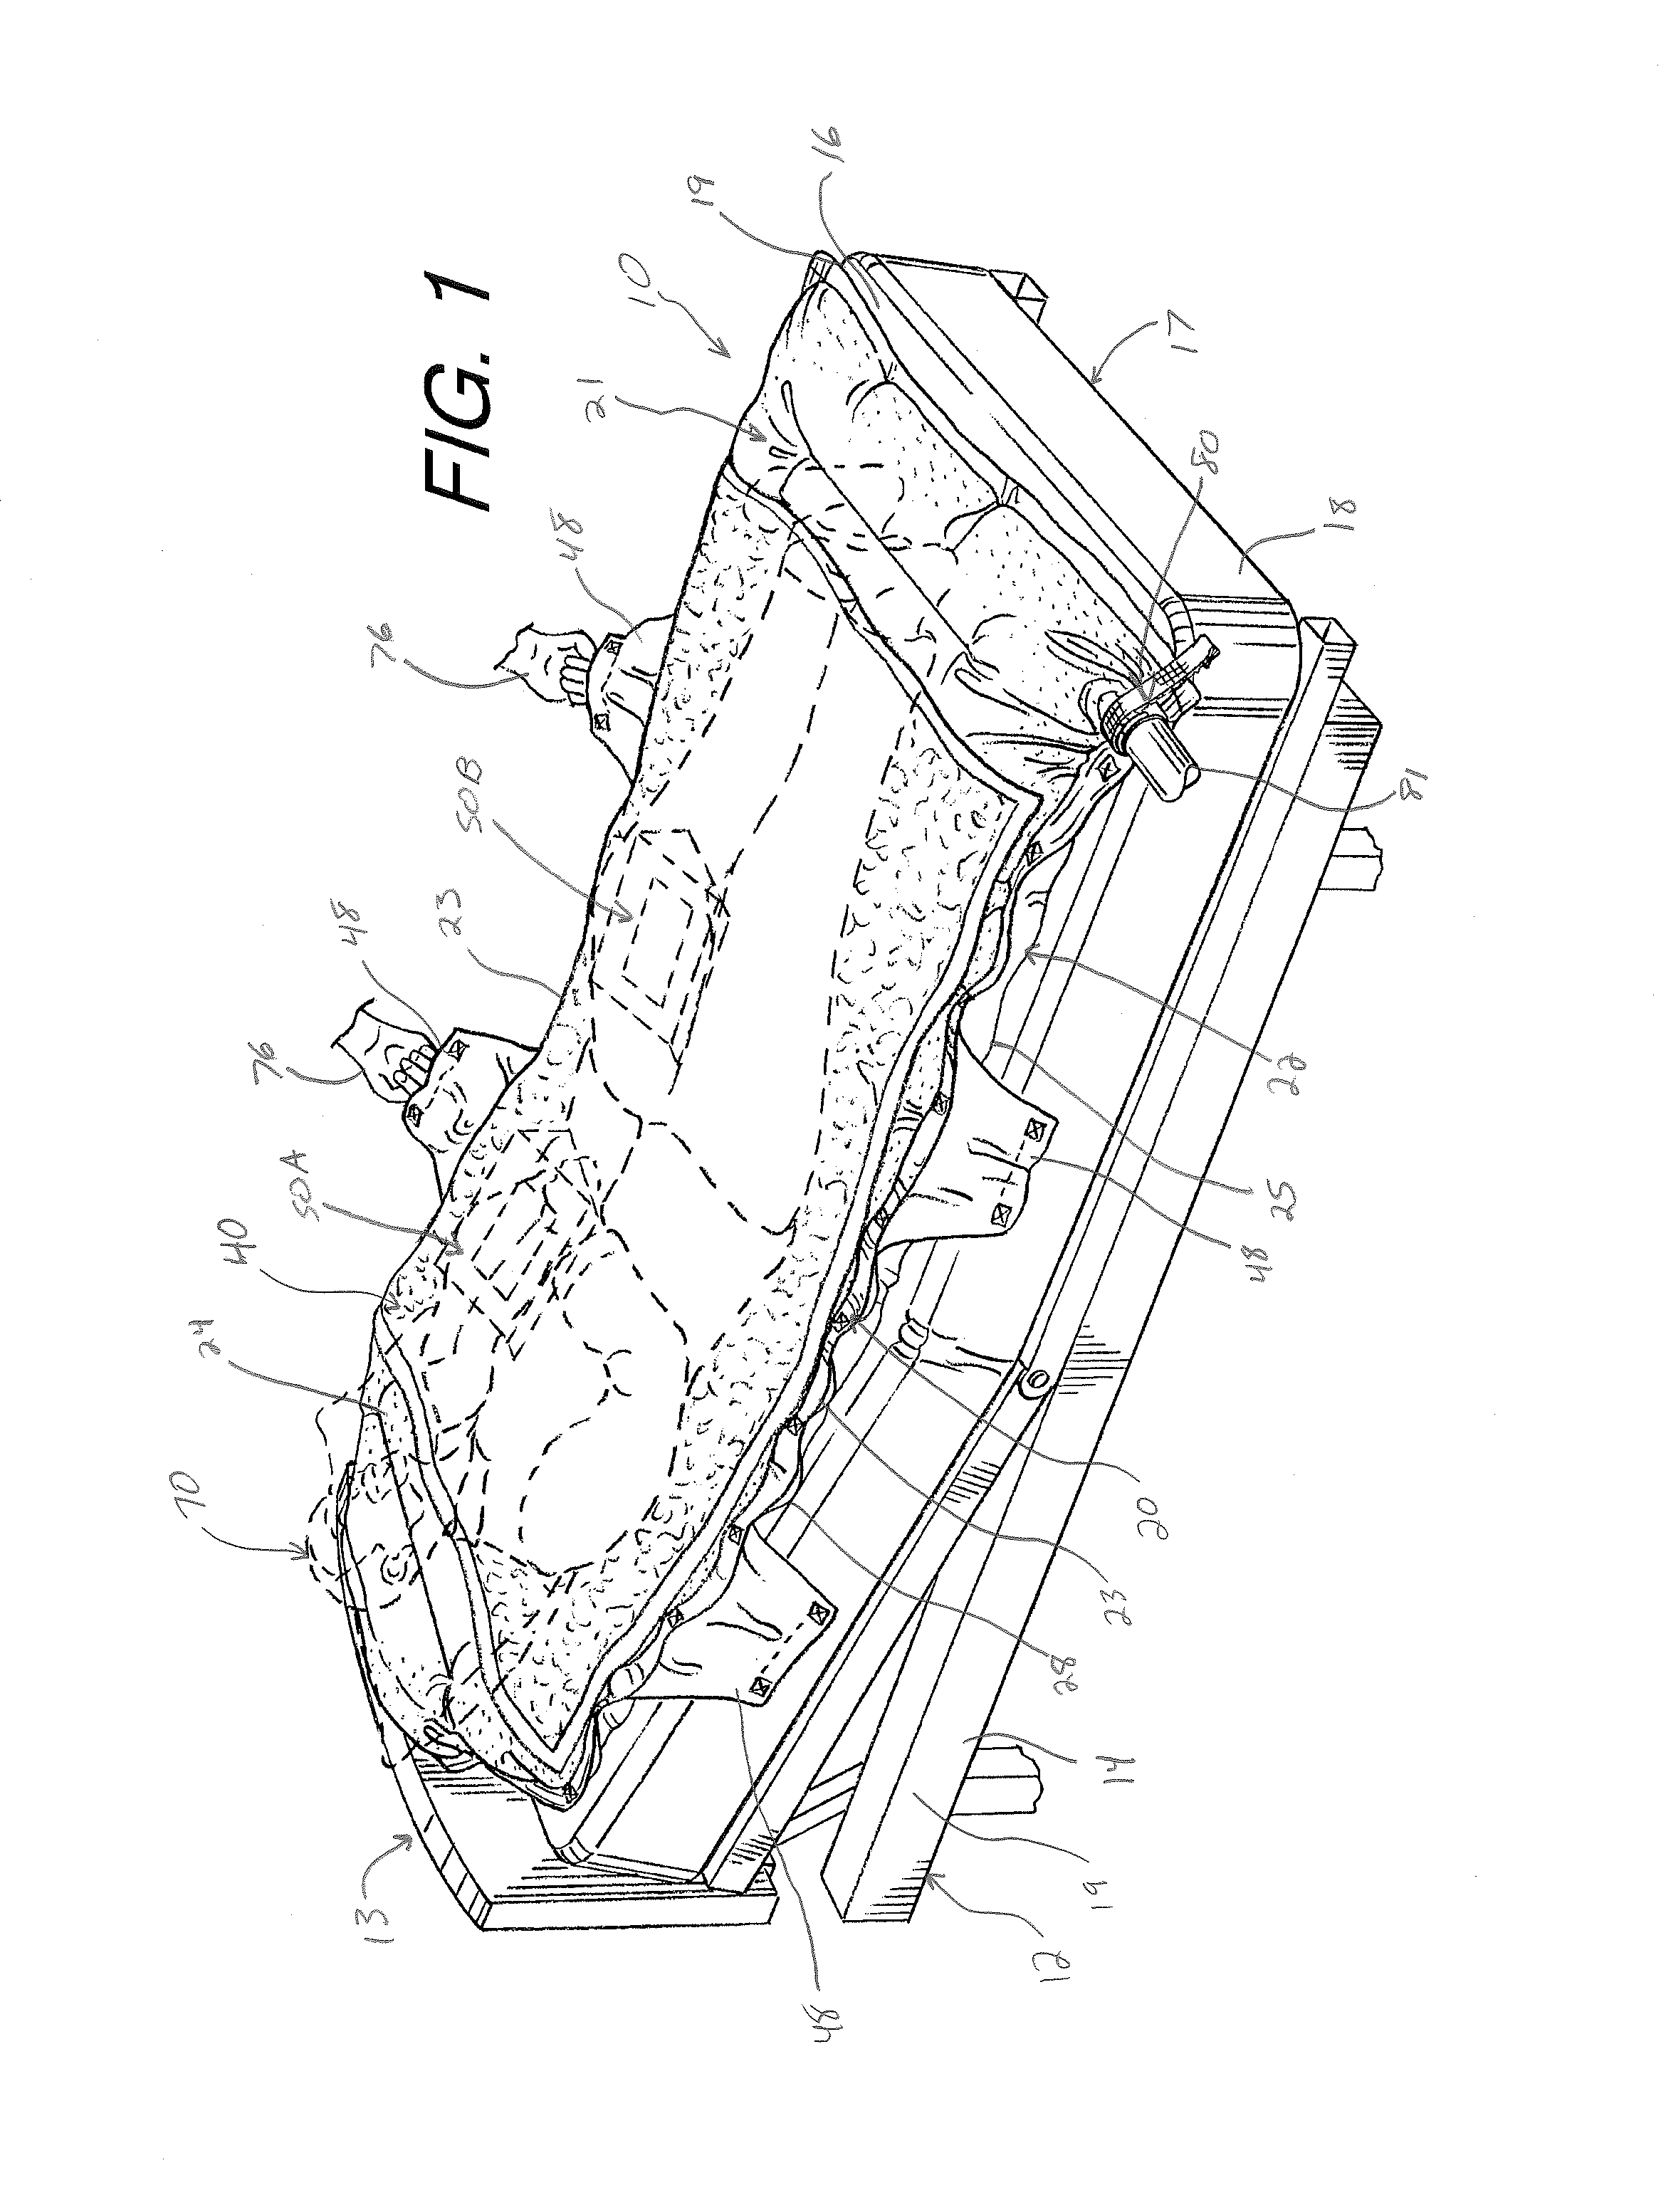 Apparatus and System for Boosting, Transferring, Turning and Positioning a Patient